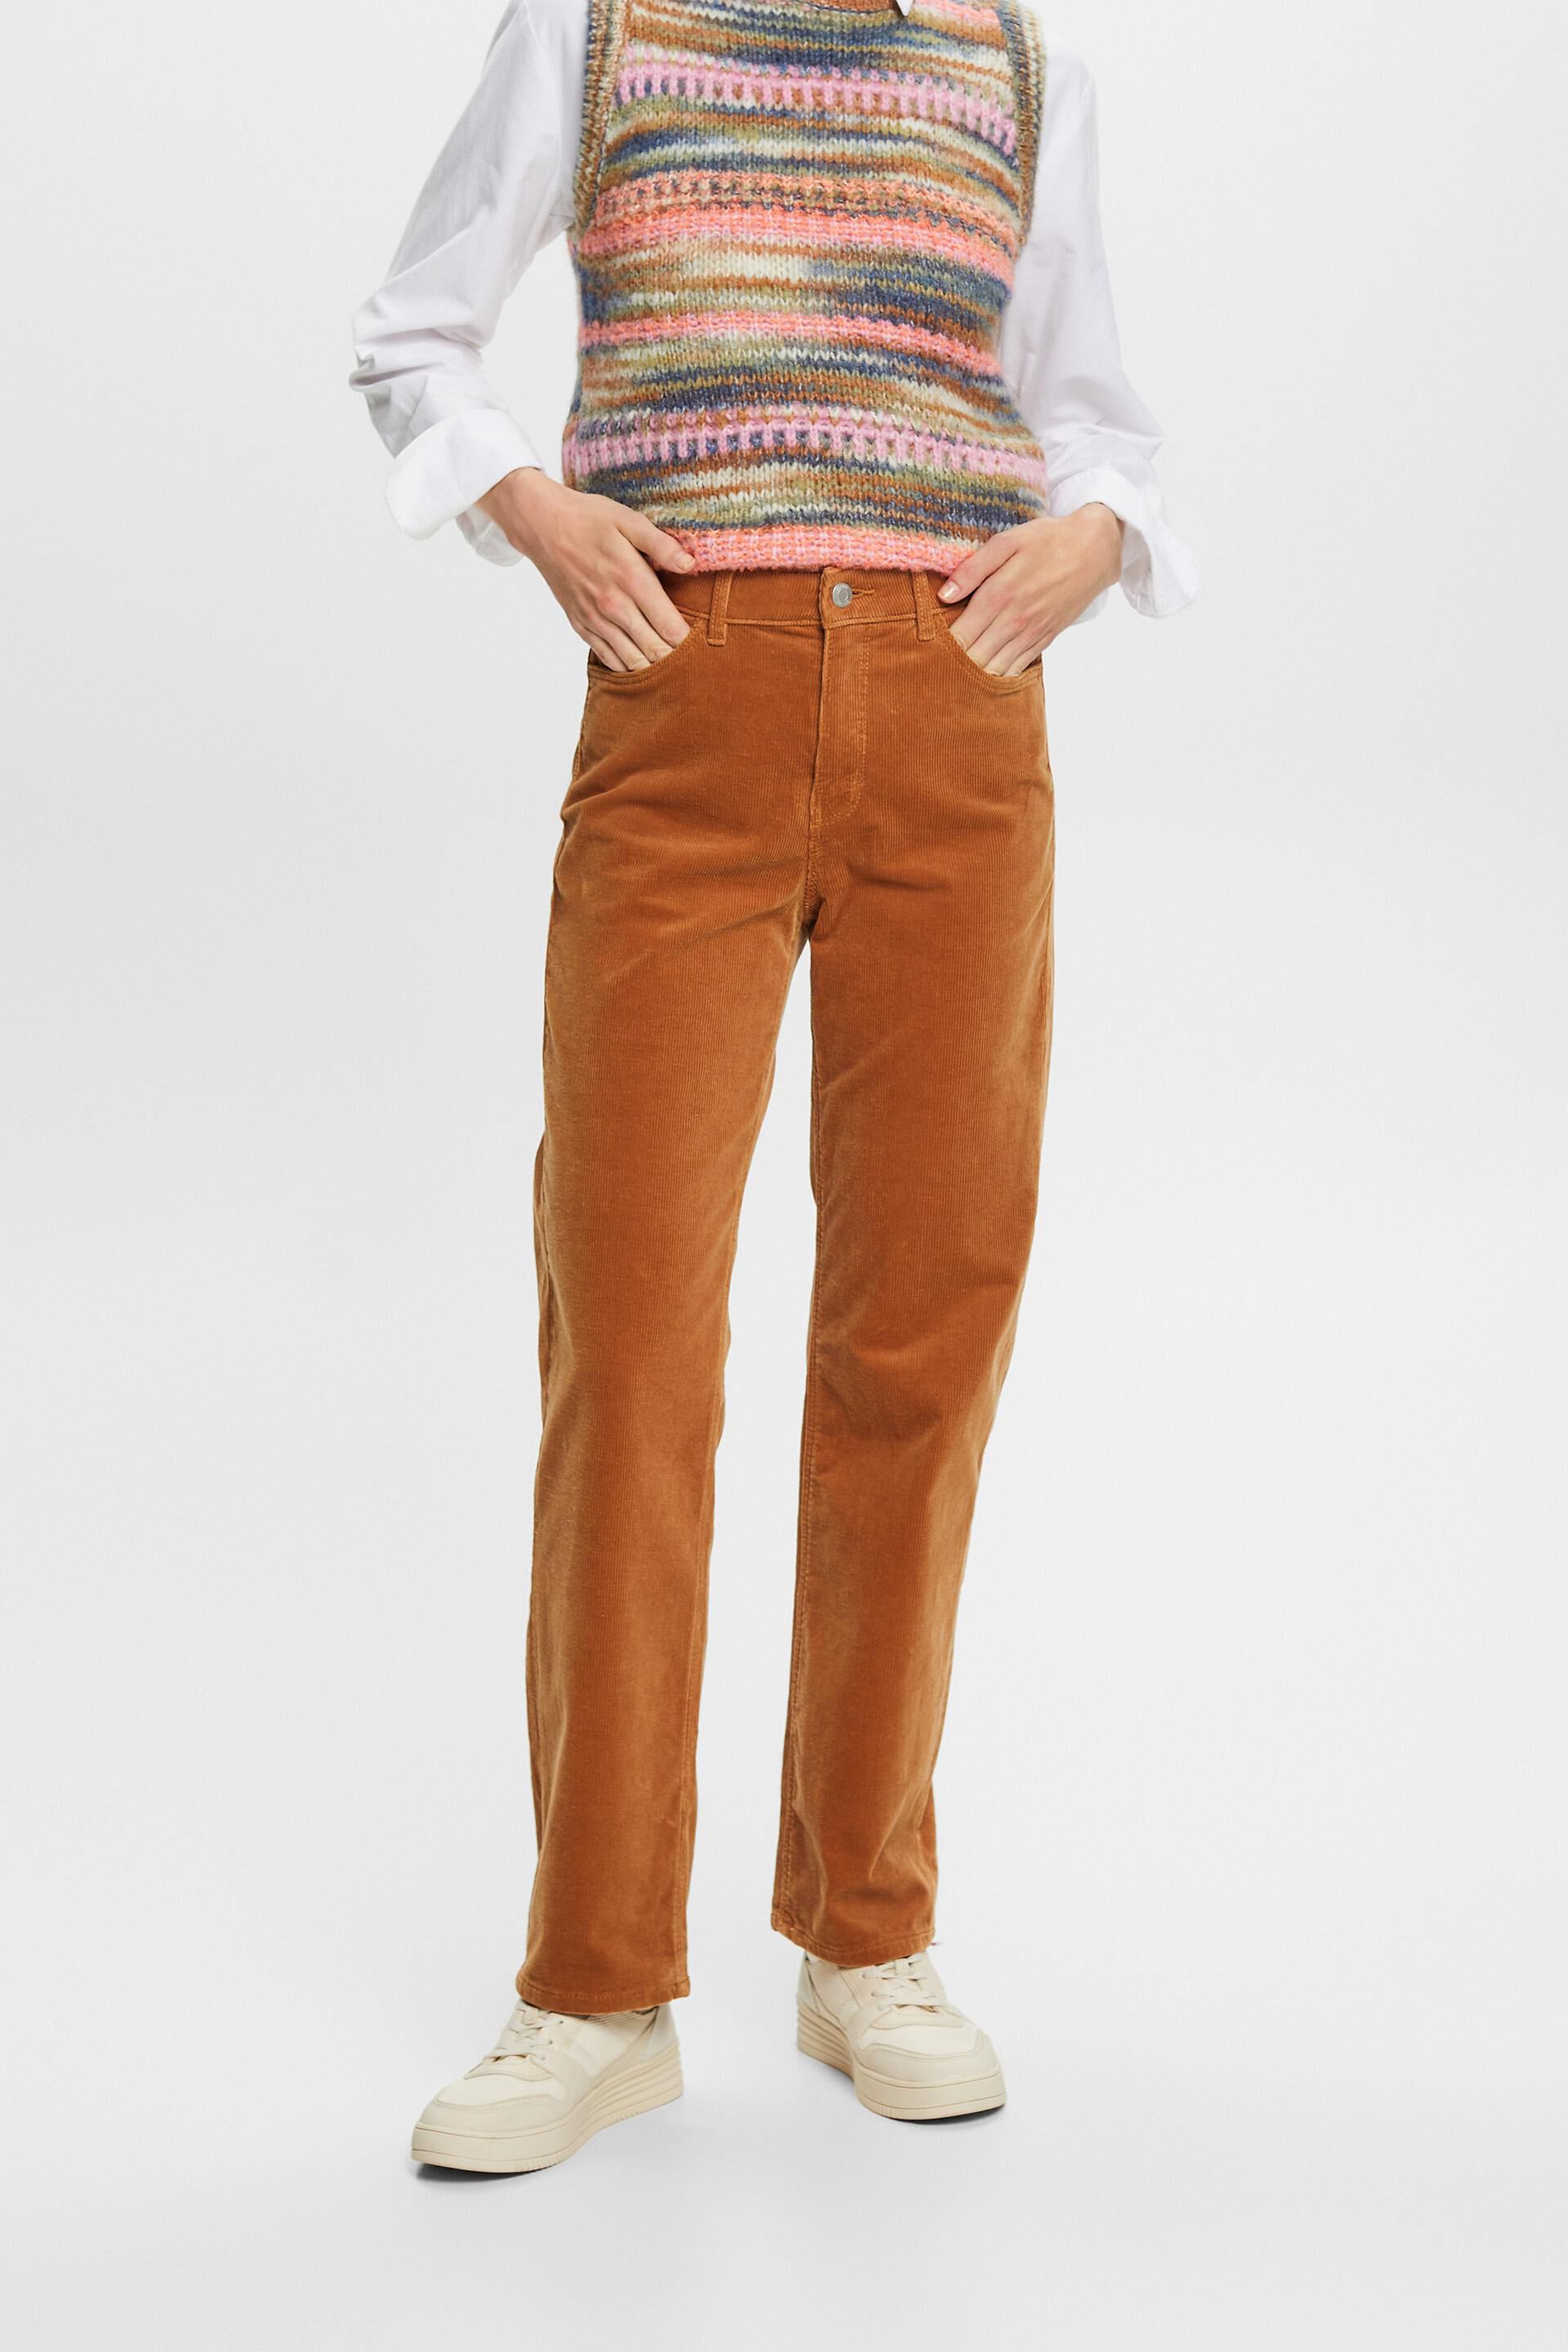 Mens Corduroy Trousers at Rs 1295/piece | कॉरडरॉय ट्राउजर in Kolkata | ID:  16434930573